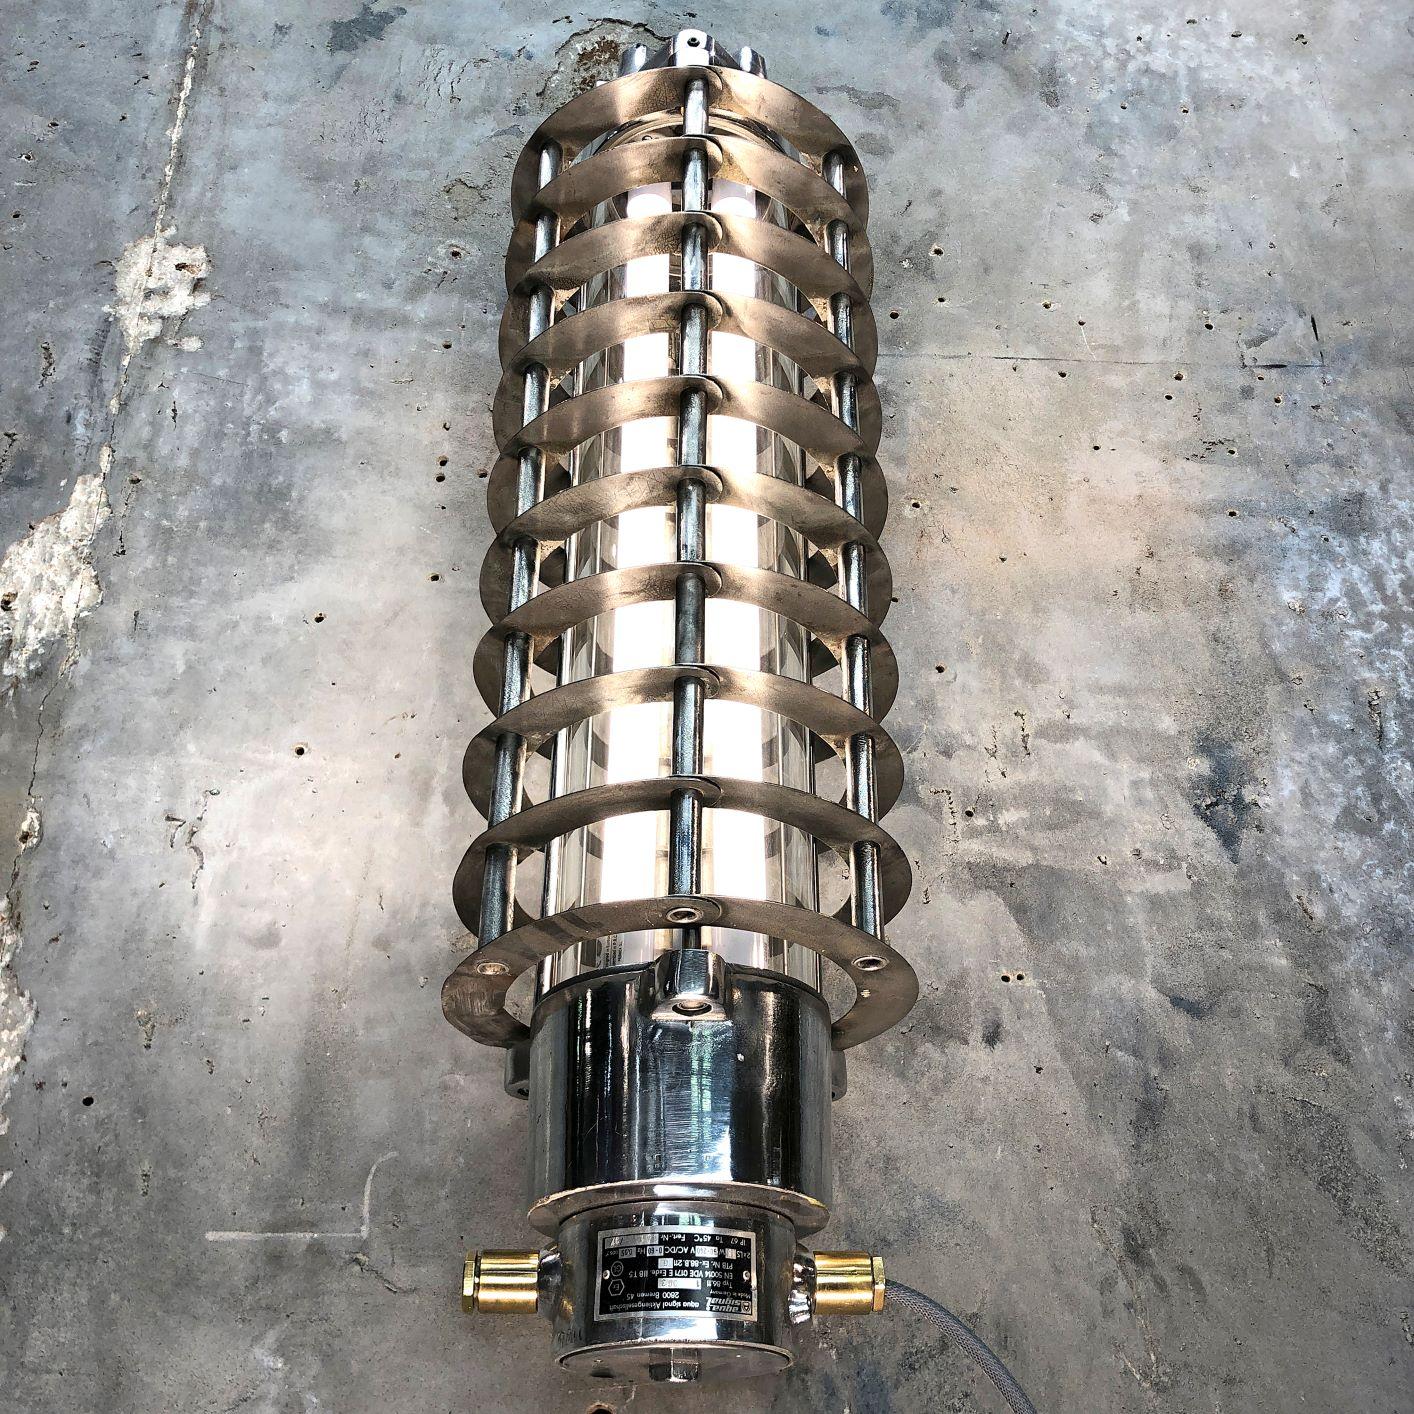 A retro Industrial aluminum wall-mounted flameproof striplight with protective cage by Wittenberg. Reclaimed from supertankers and military vessels then professionally stripped, restored and rewired by Loomlight in the UK.

This fixture is